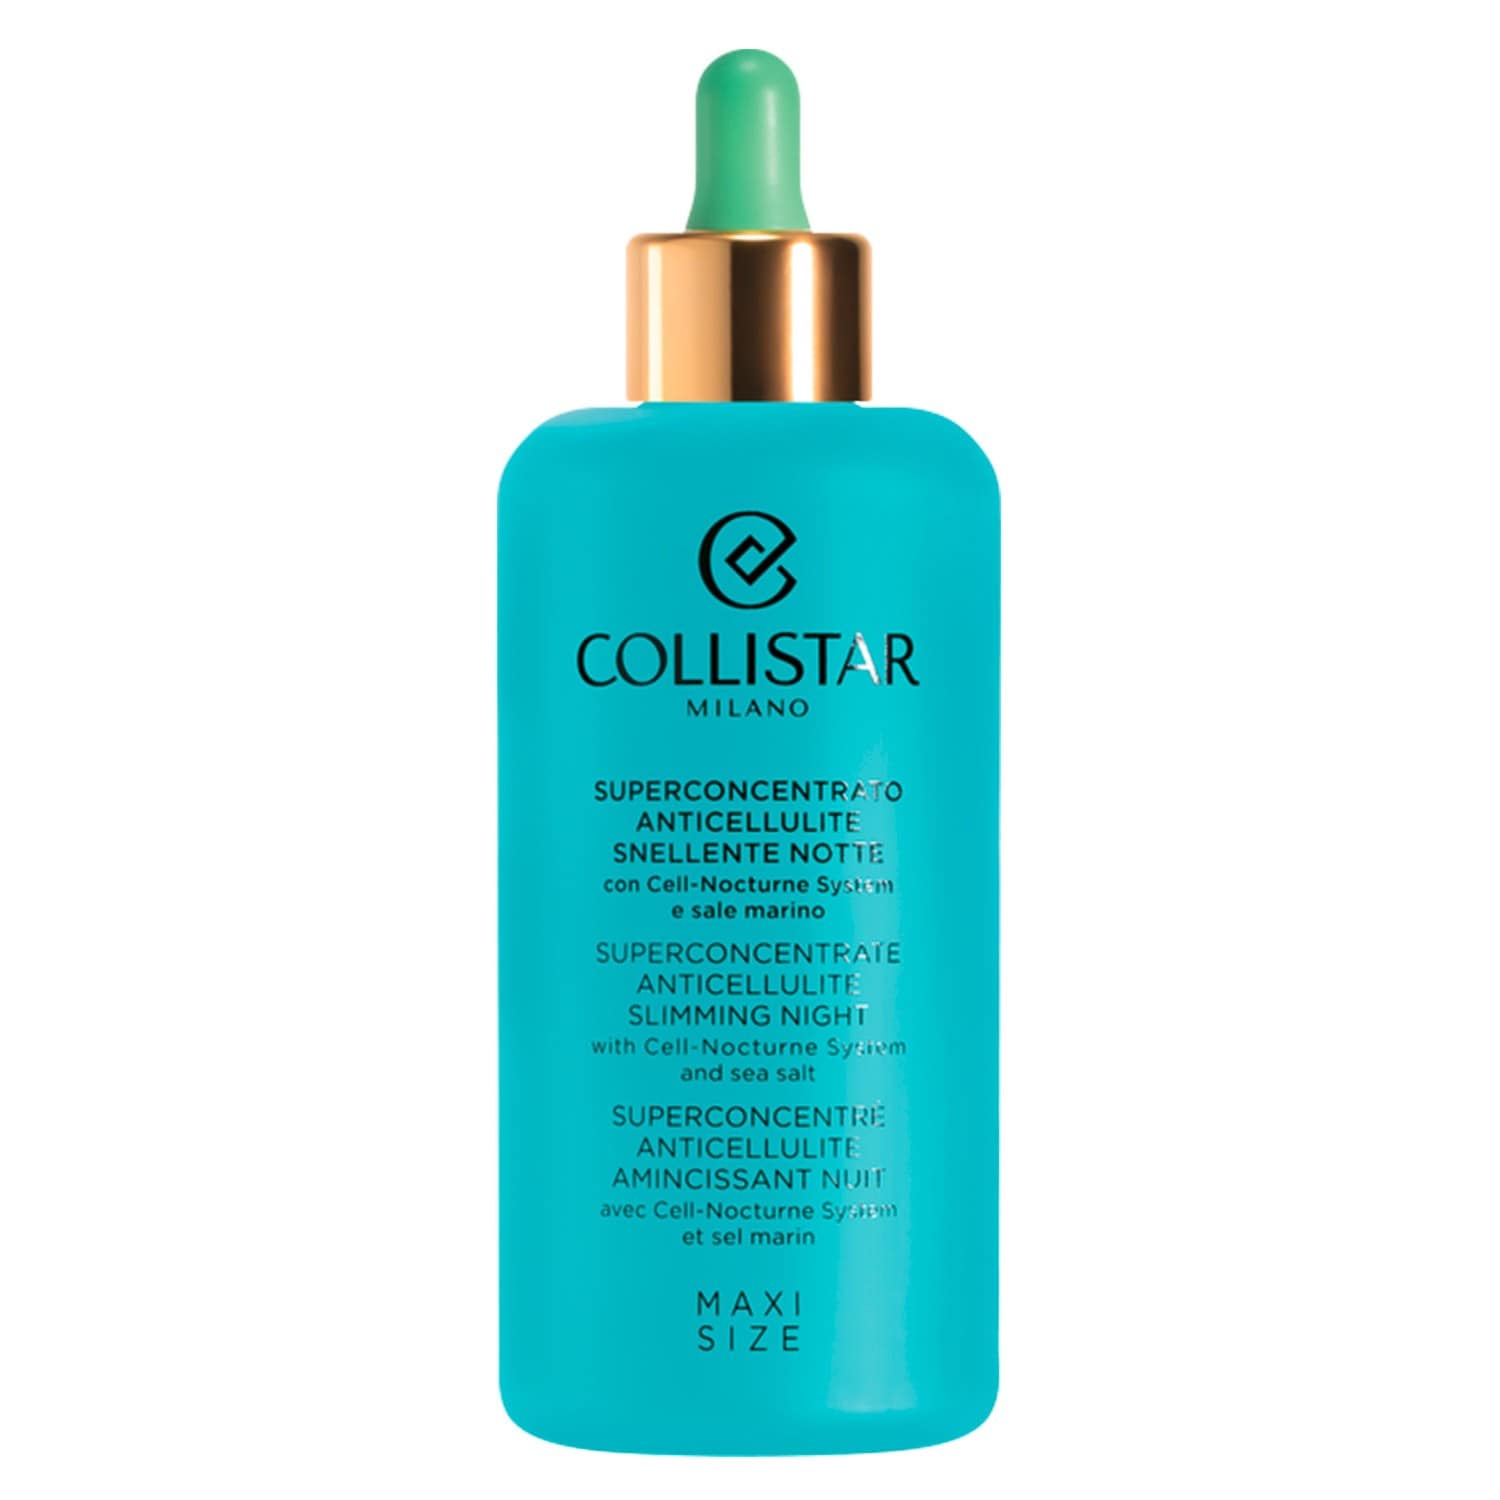 Collistar Anti-Cellulite Slimming Superconcentrate Night with Cell-Coconut® System and Sea Salt